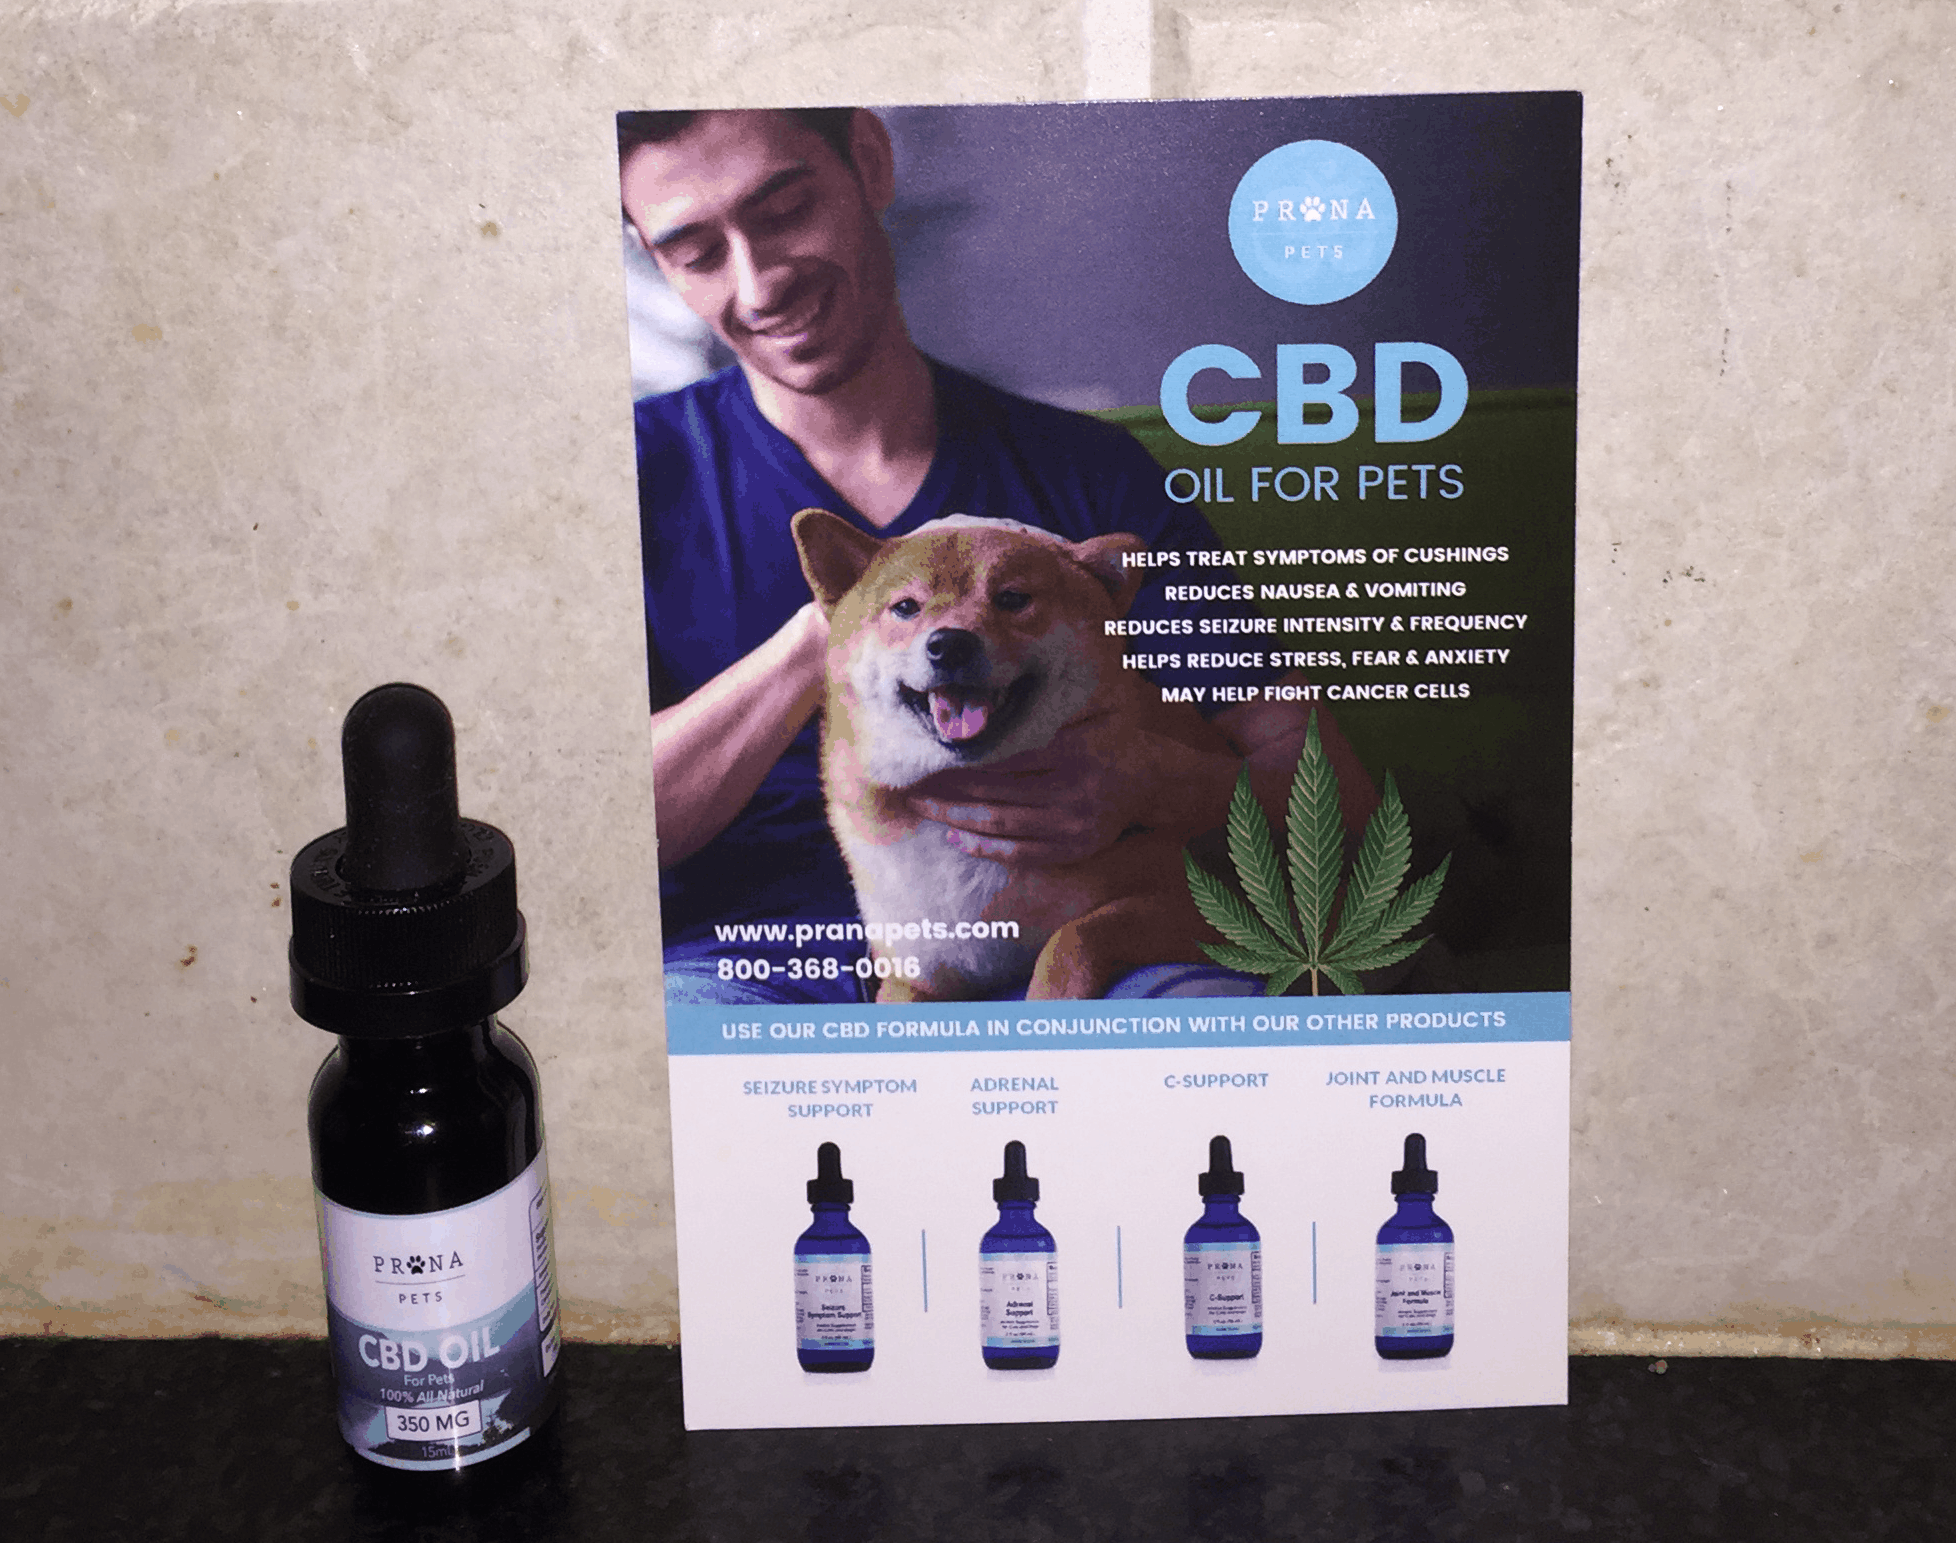 Nuleaf Naturals-The Uncompromised Way Of Keeping Its Customers Happy With The Best CBD Products